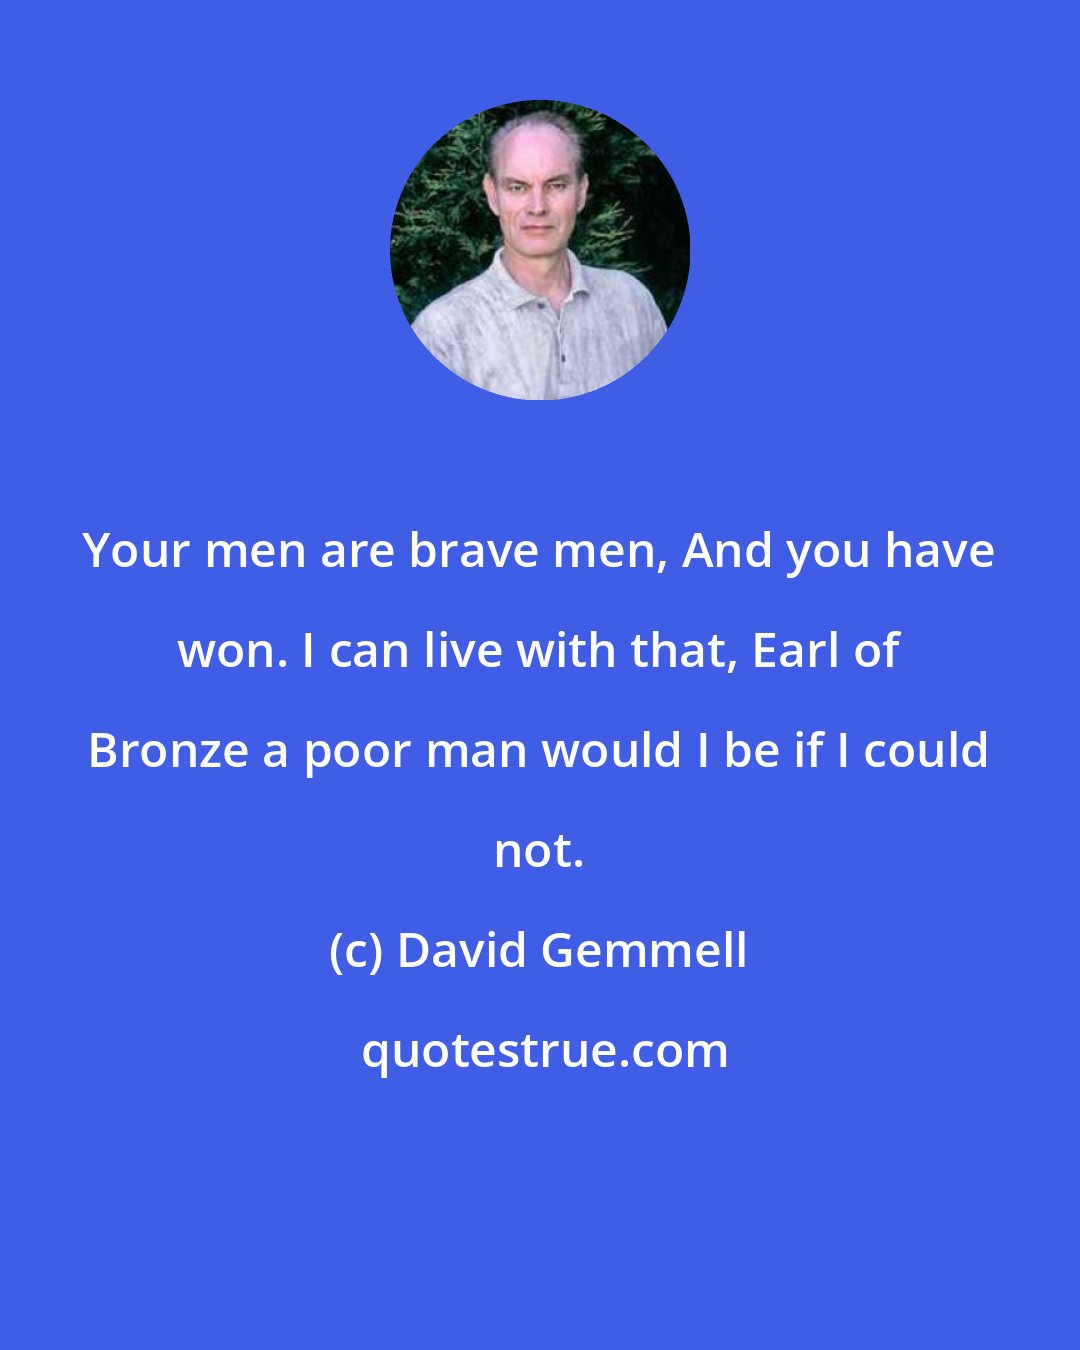 David Gemmell: Your men are brave men, And you have won. I can live with that, Earl of Bronze a poor man would I be if I could not.